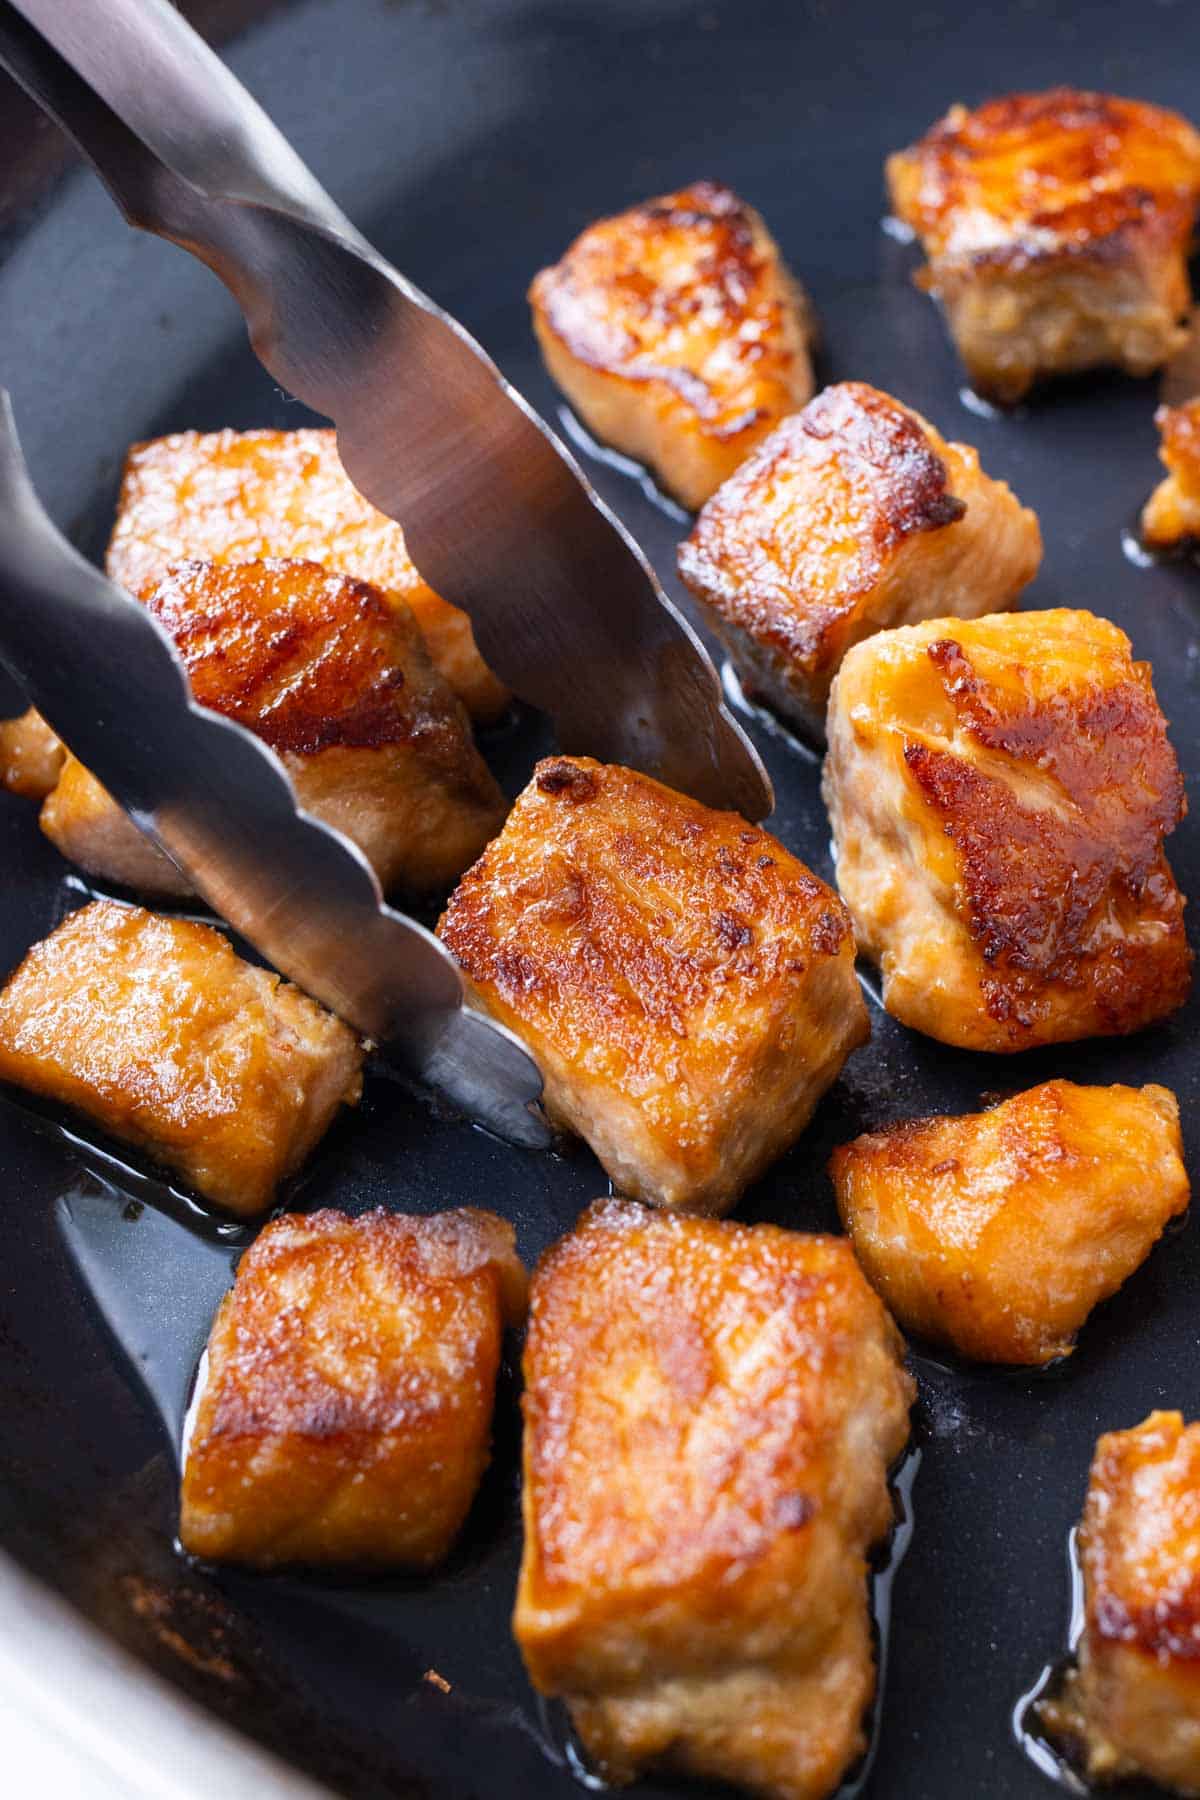 Marinated teriyaki salmon bites are cooked in a skillet.